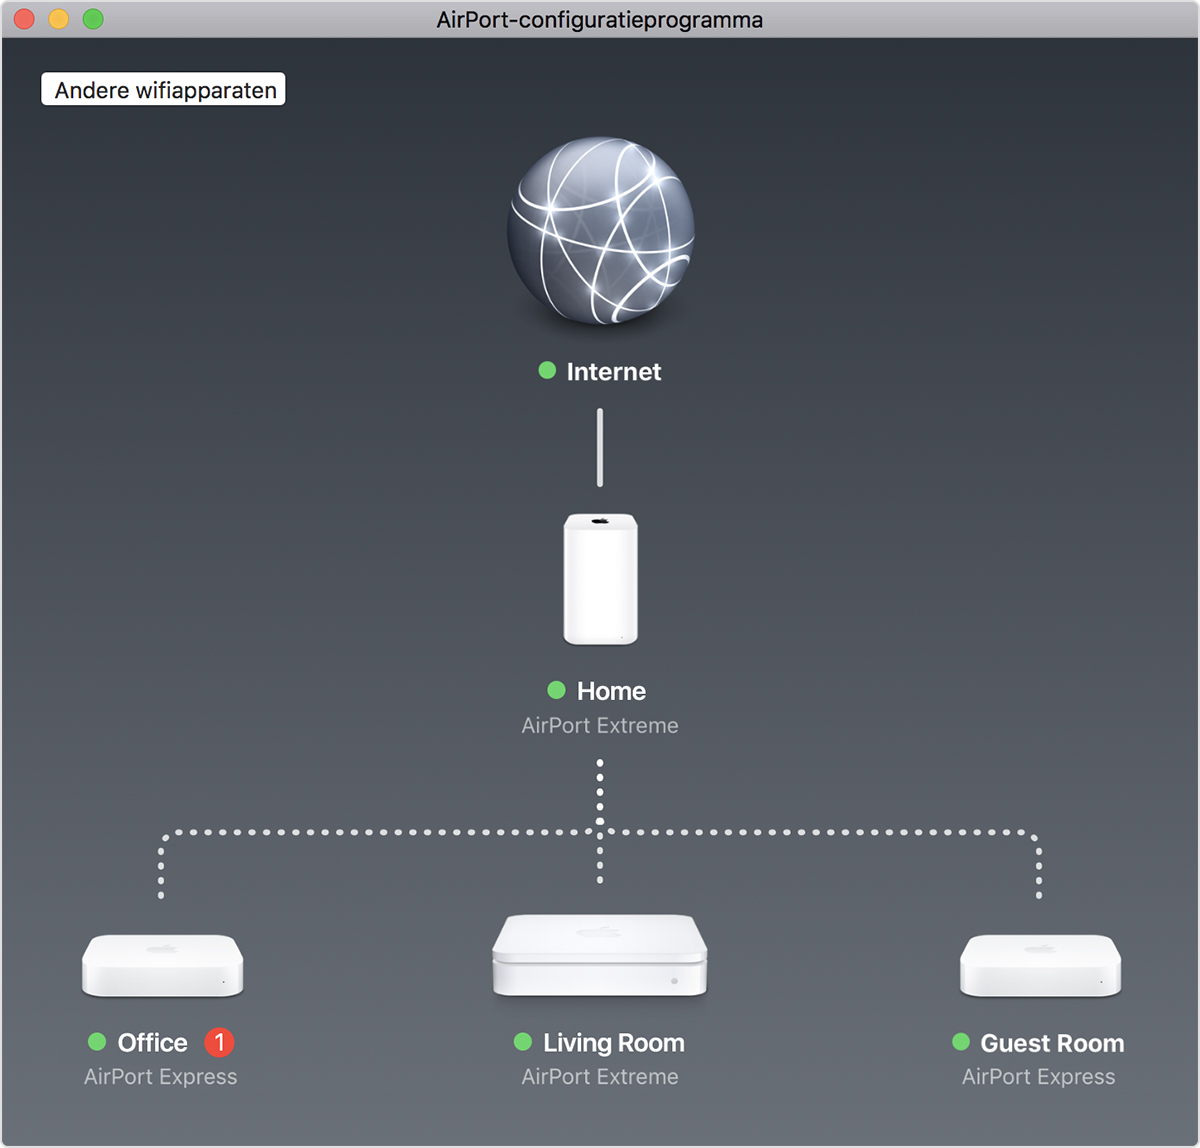 airport utility download for mac